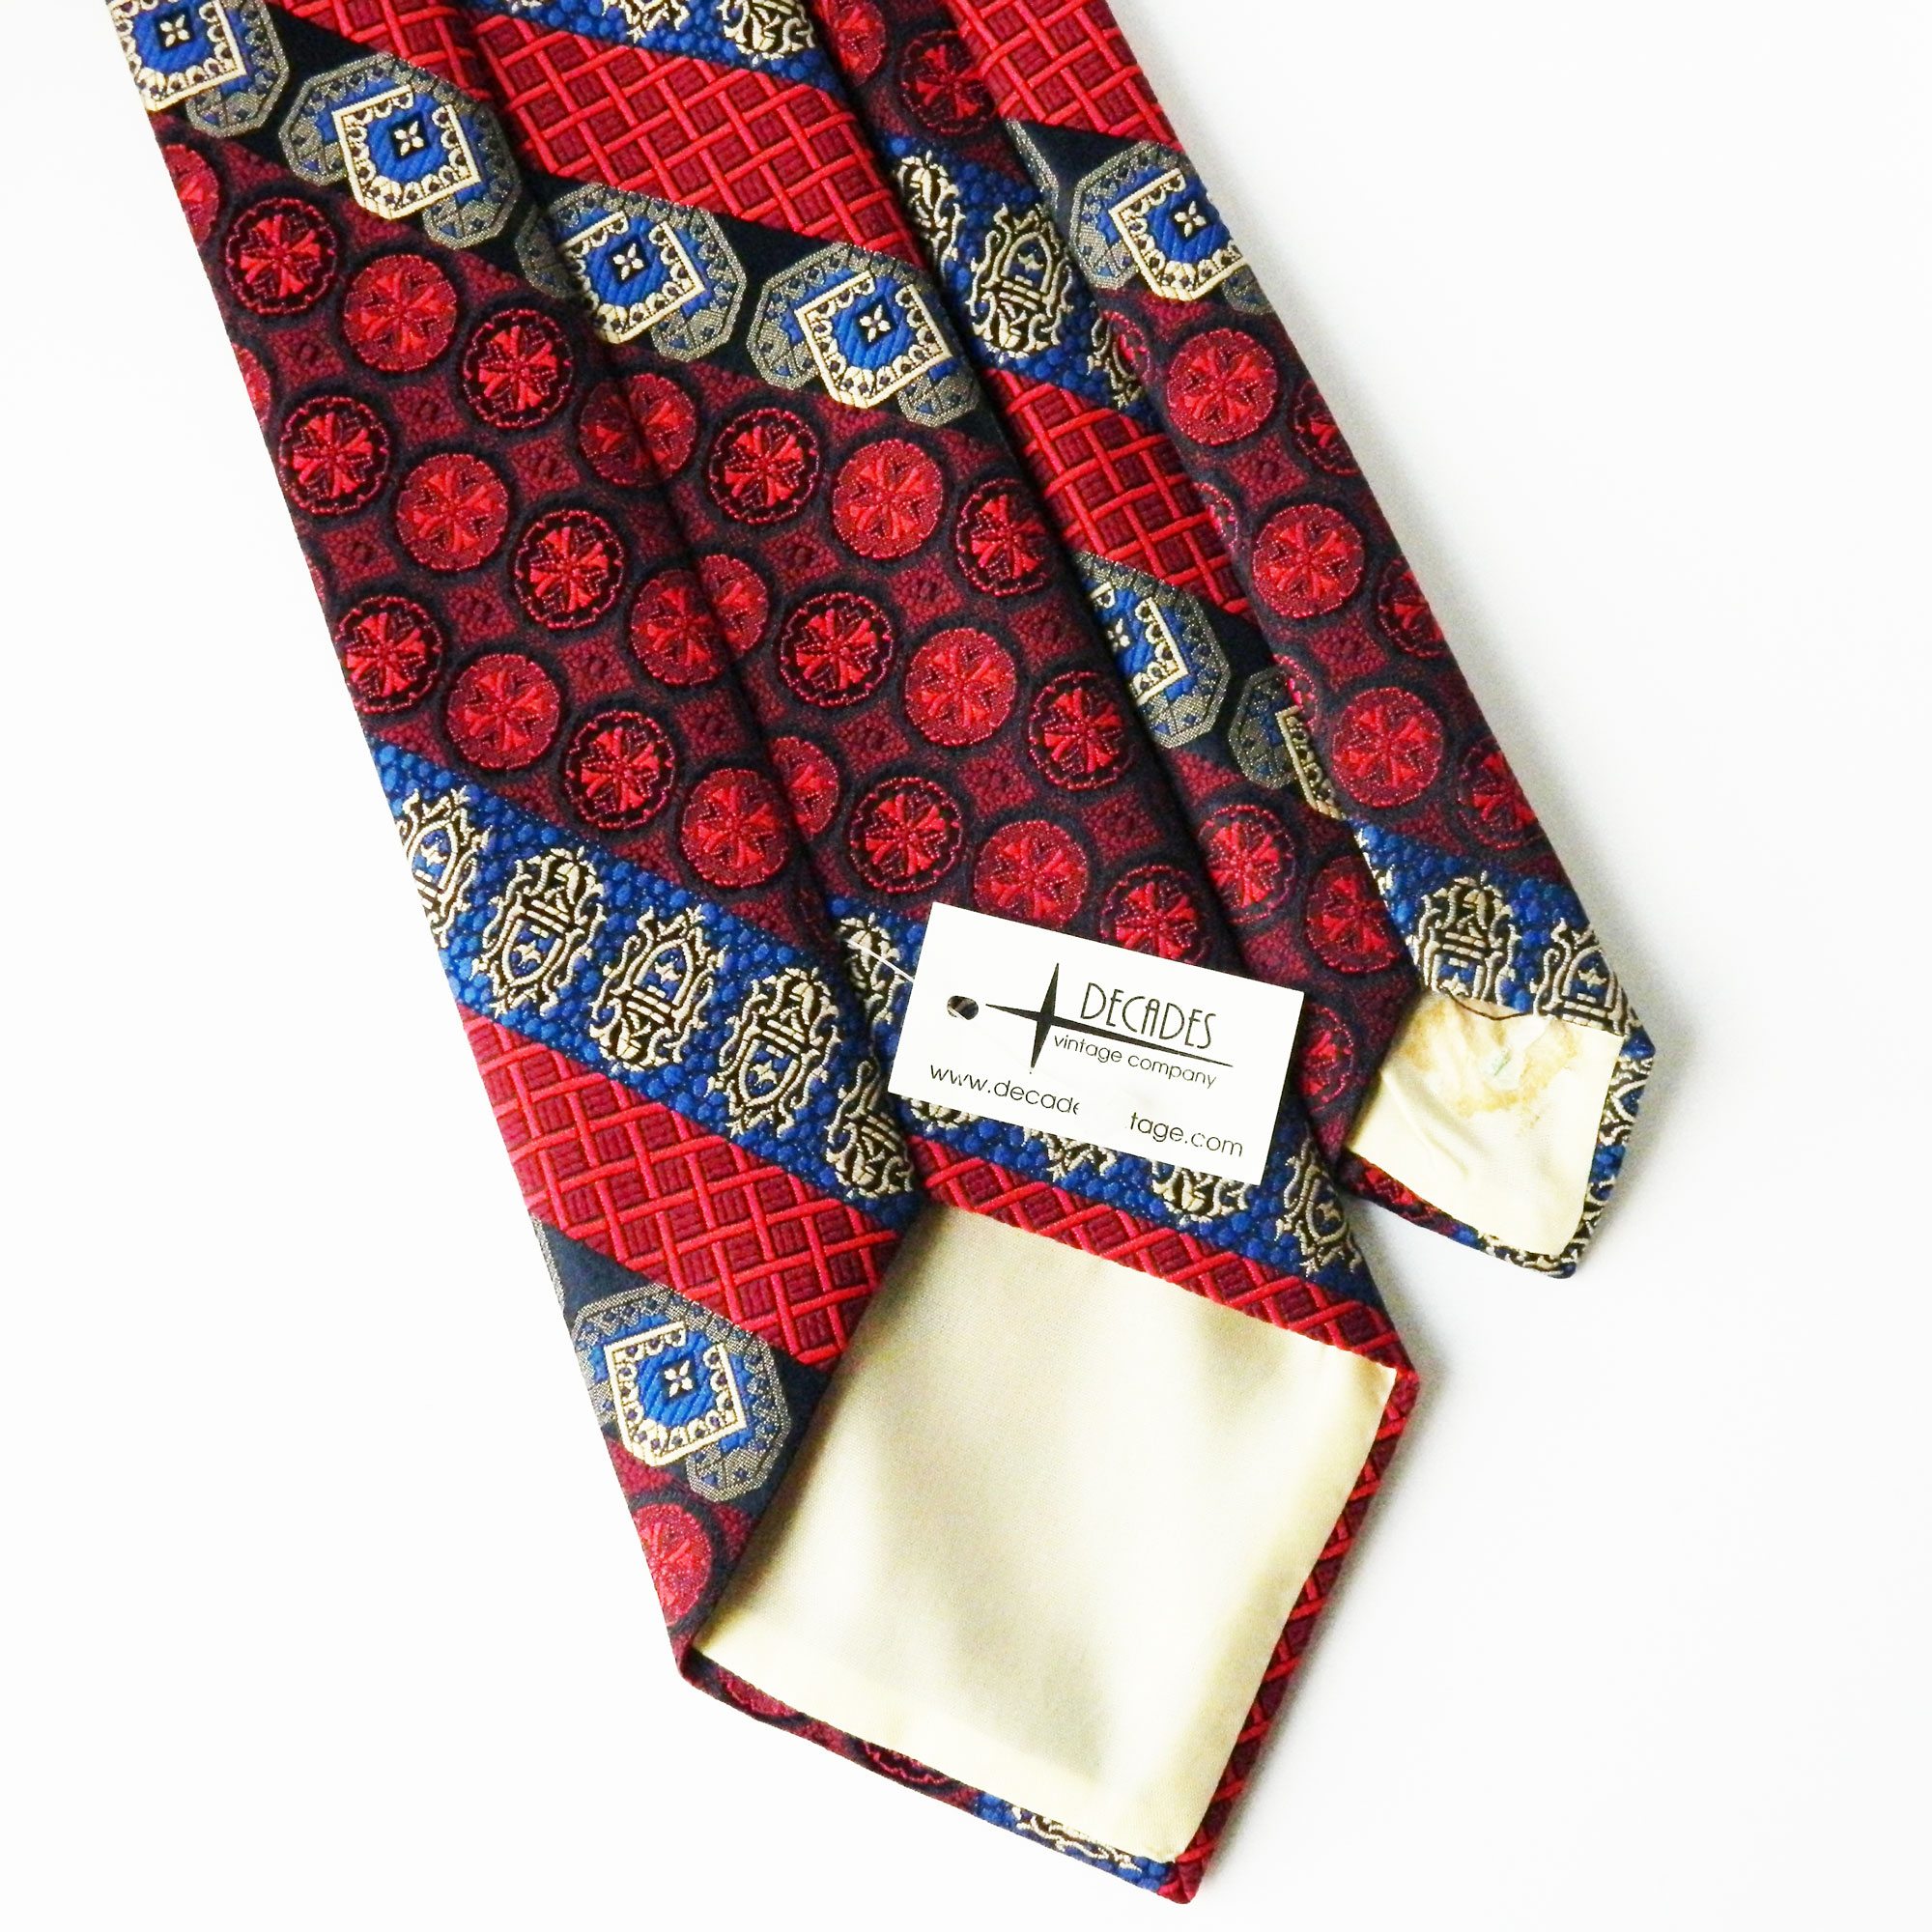 1970s red white and blue tie